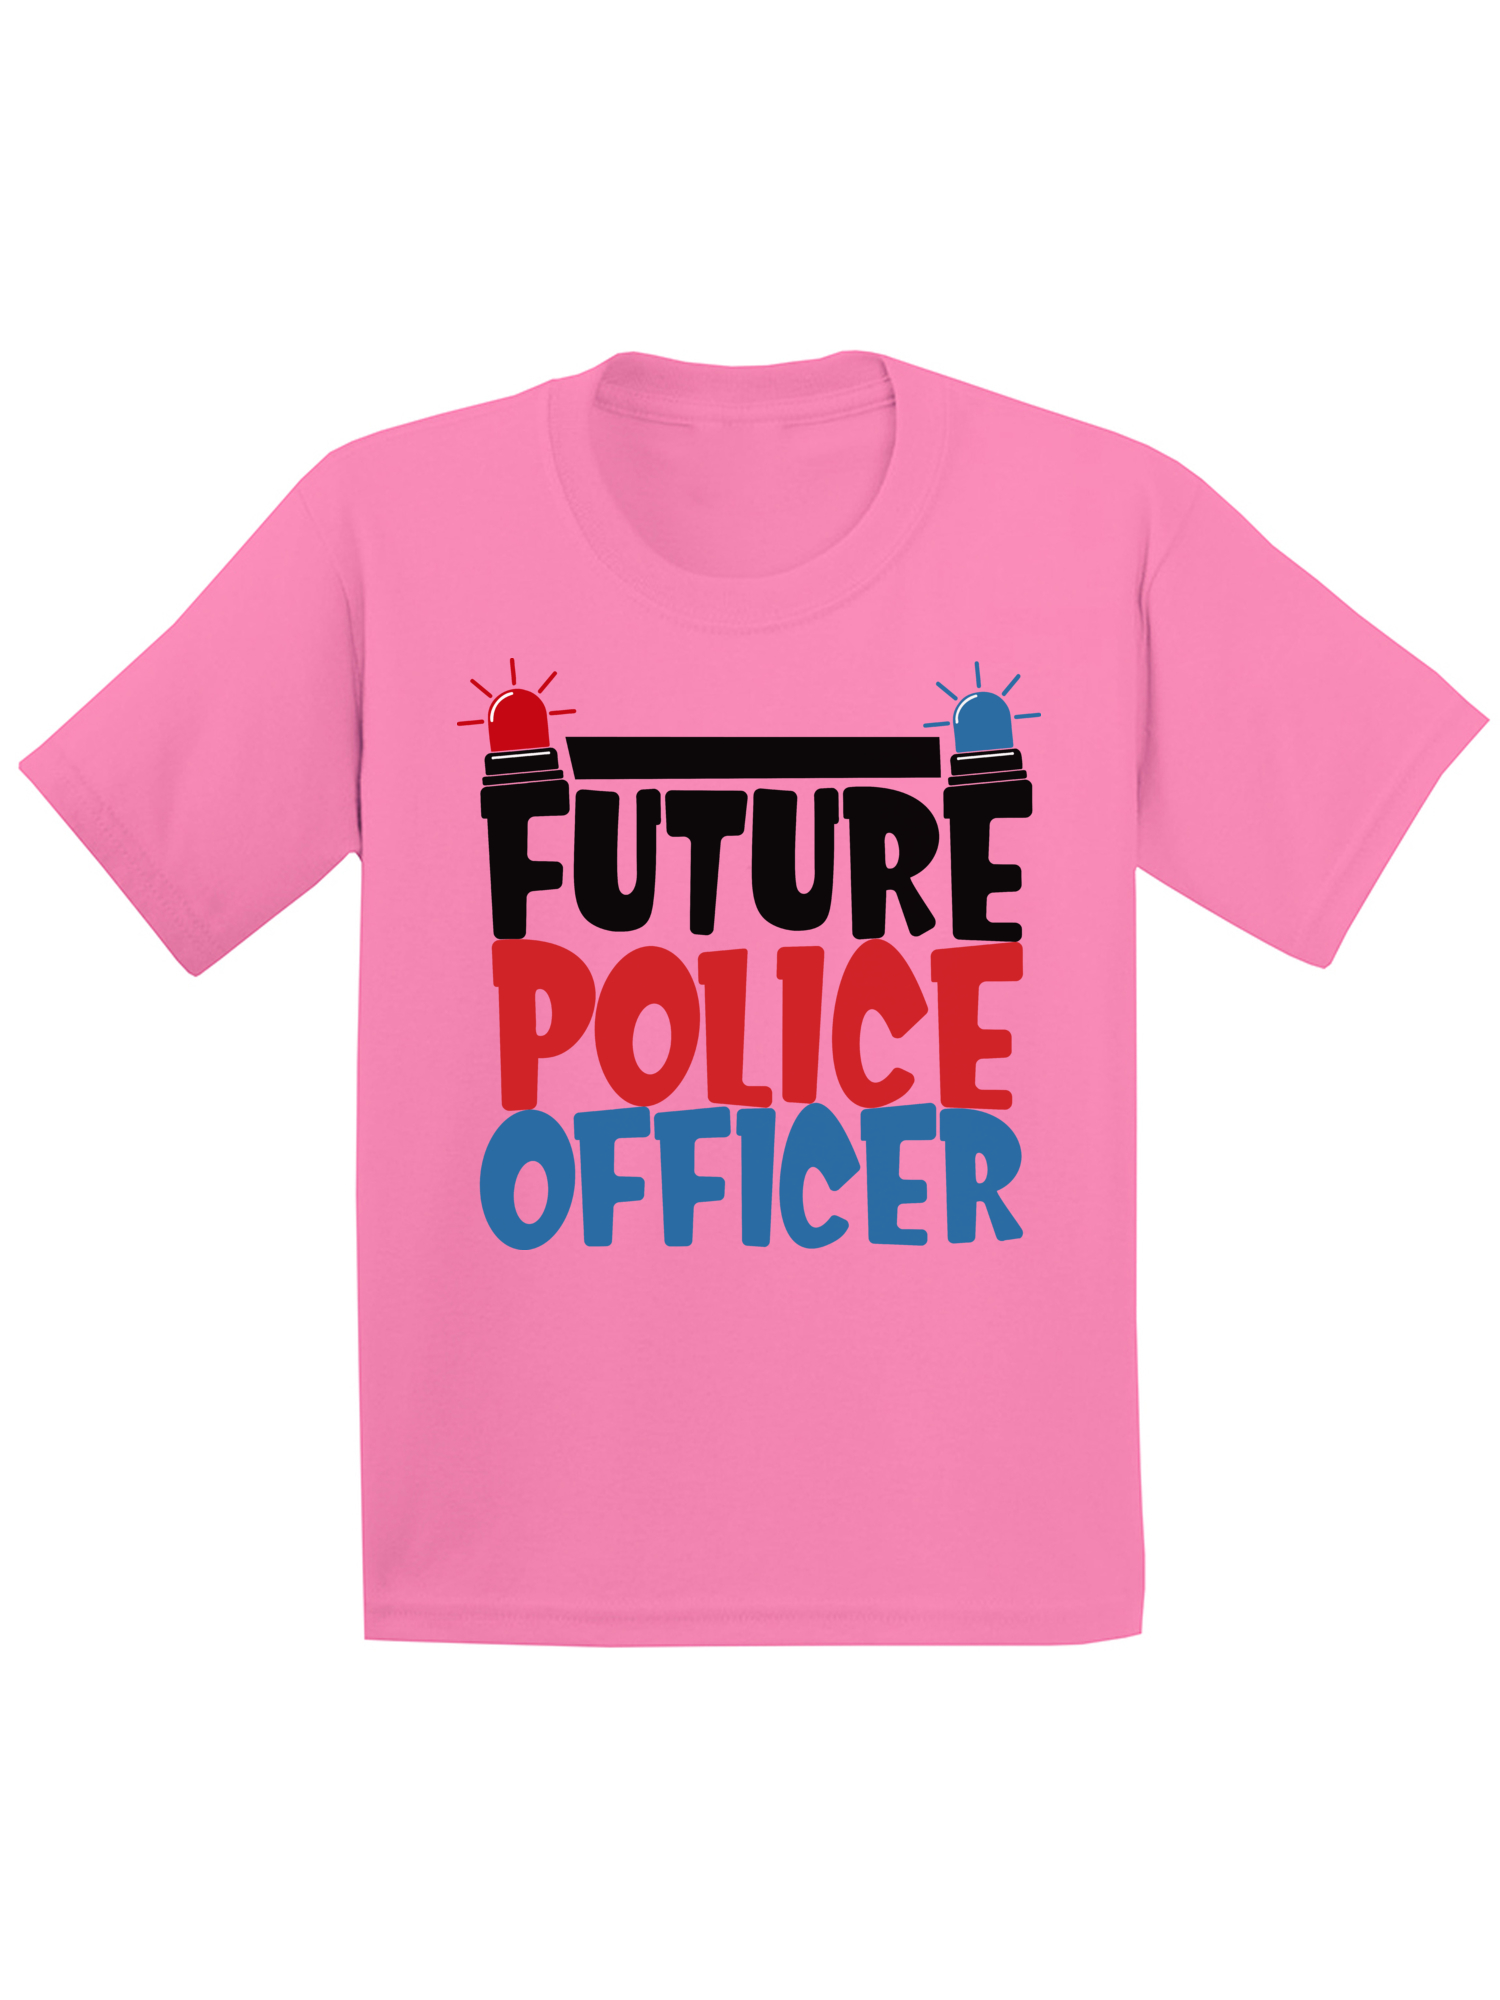 Awkward Styles Future Police Officer Youth Shirt Cute Birthday Gifts Kids Police Shirts Funny Future Job Tshirts for Boys Funny Future Job Tshirts for Girls Themed Party Policeman T shirts for Kids - image 1 of 4